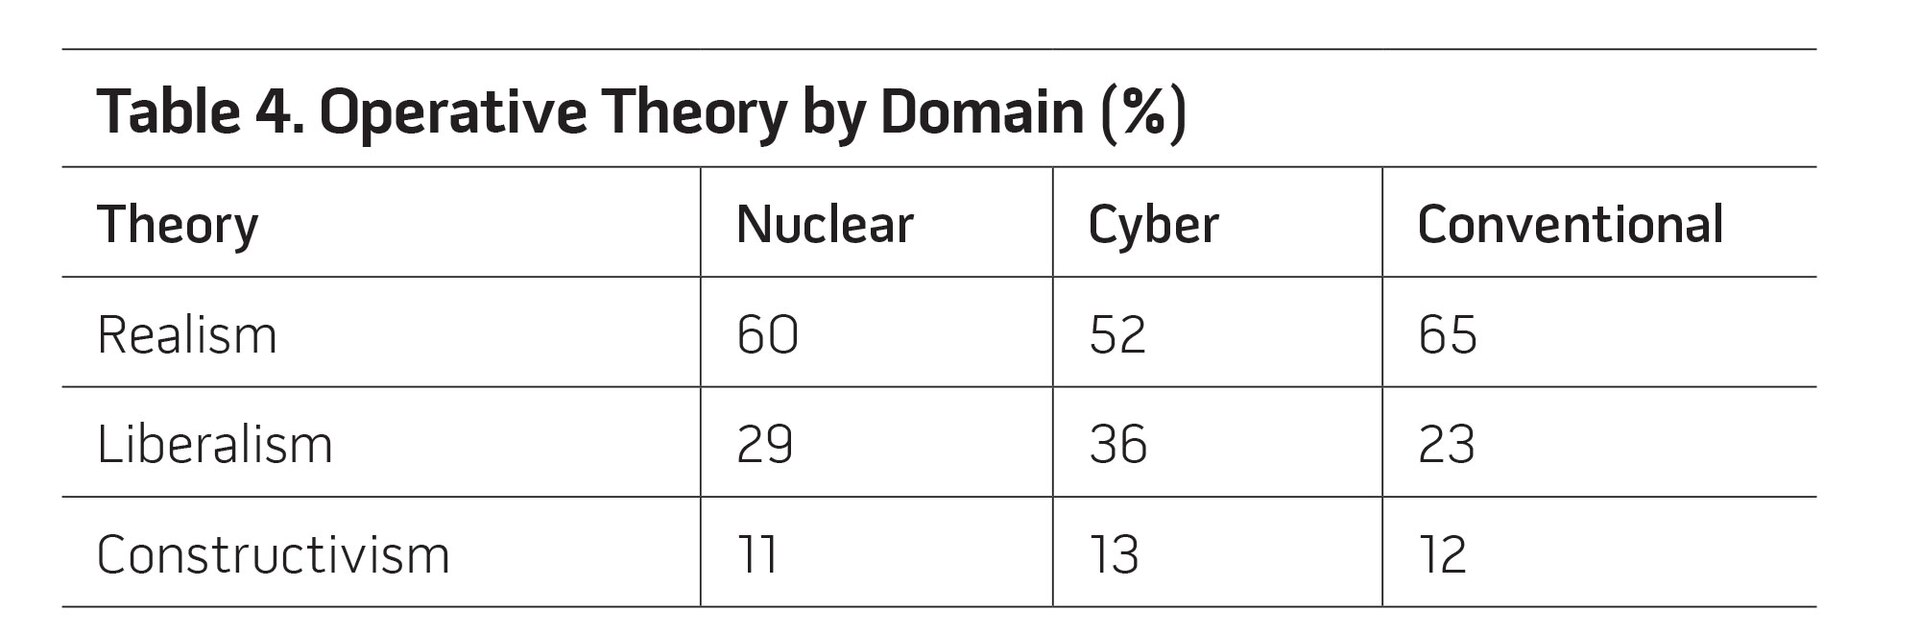 Table 4. Operative Theory by Domain (%)